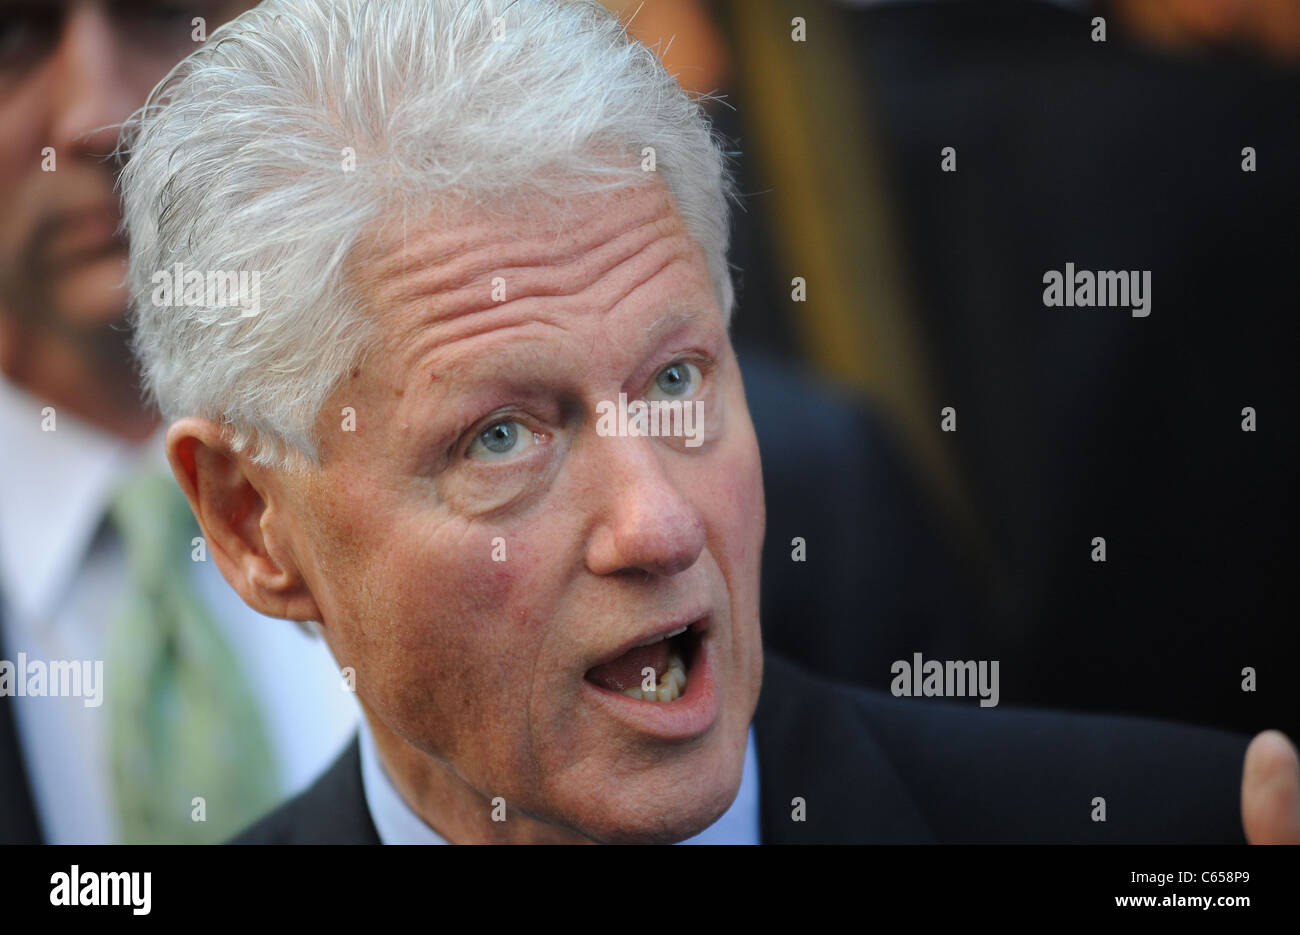 Former U.S. President William Jefferson Clinton, aka Bill Clinton out and about for CELEBRITY CANDIDS - MONDAY, Midtown Manhattan, New York, NY September 20, 2010. Photo By: Kristin Callahan/Everett Collection Stock Photo